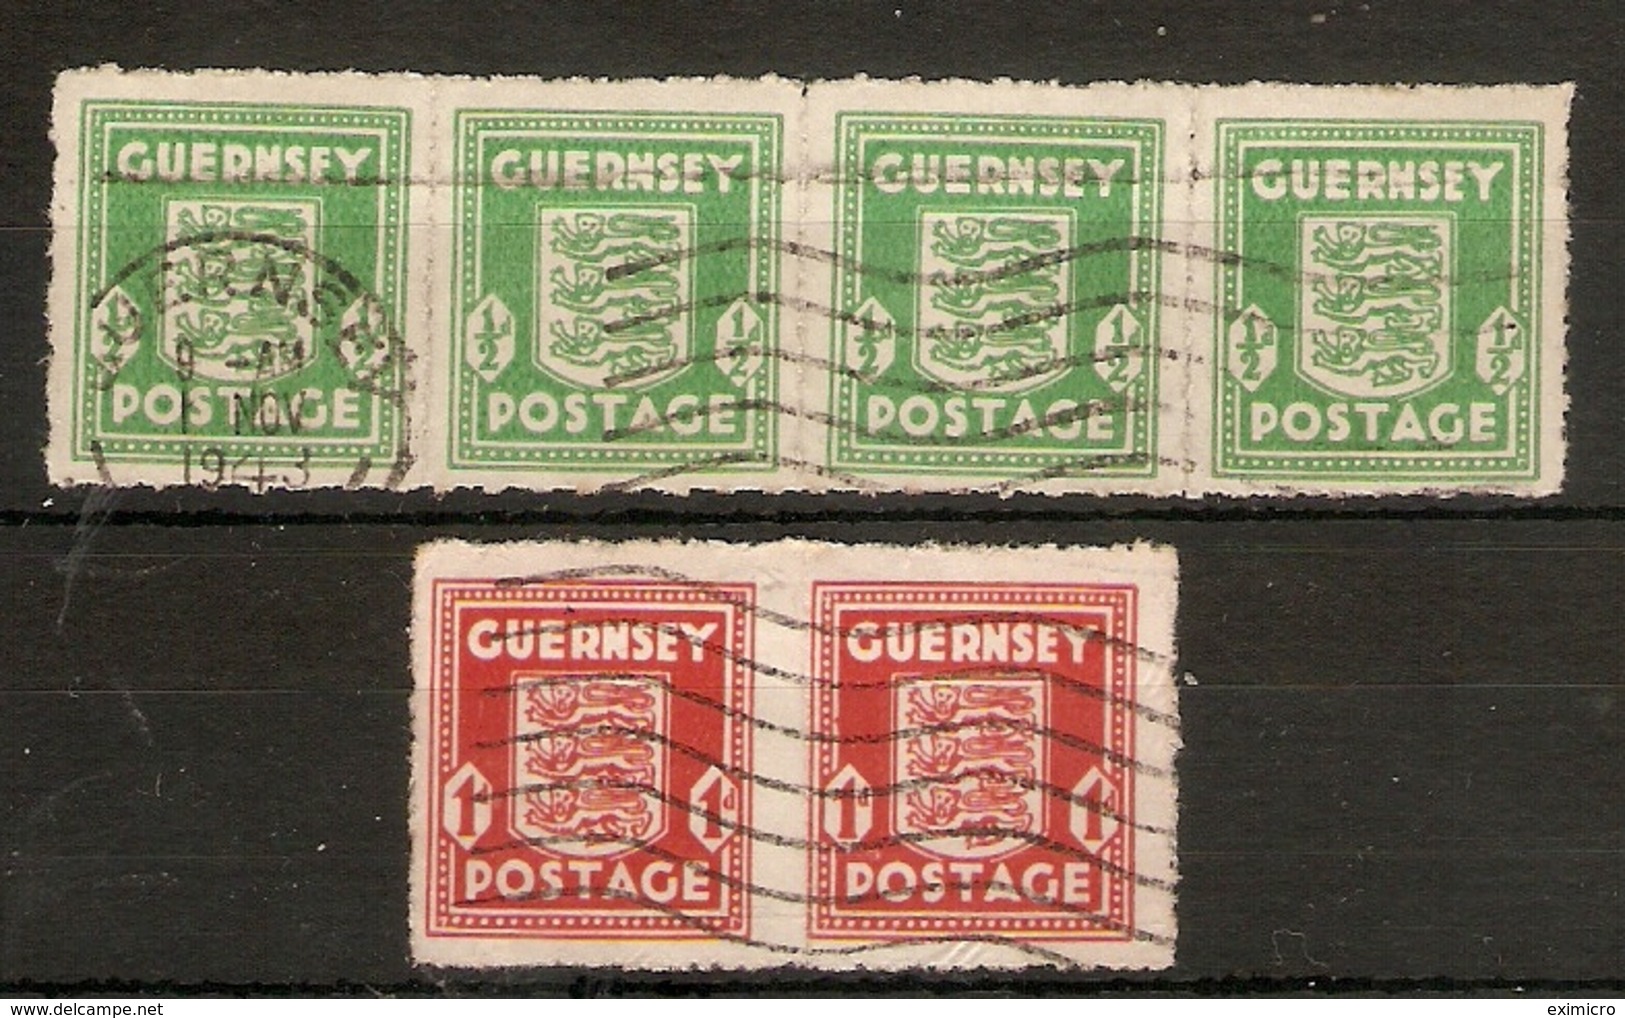 GUERNSEY 1941 - 1944 ½d  X Strip Of 4 And 1d Pair SG 1/2 FINE USED Cat £18 - Guernsey